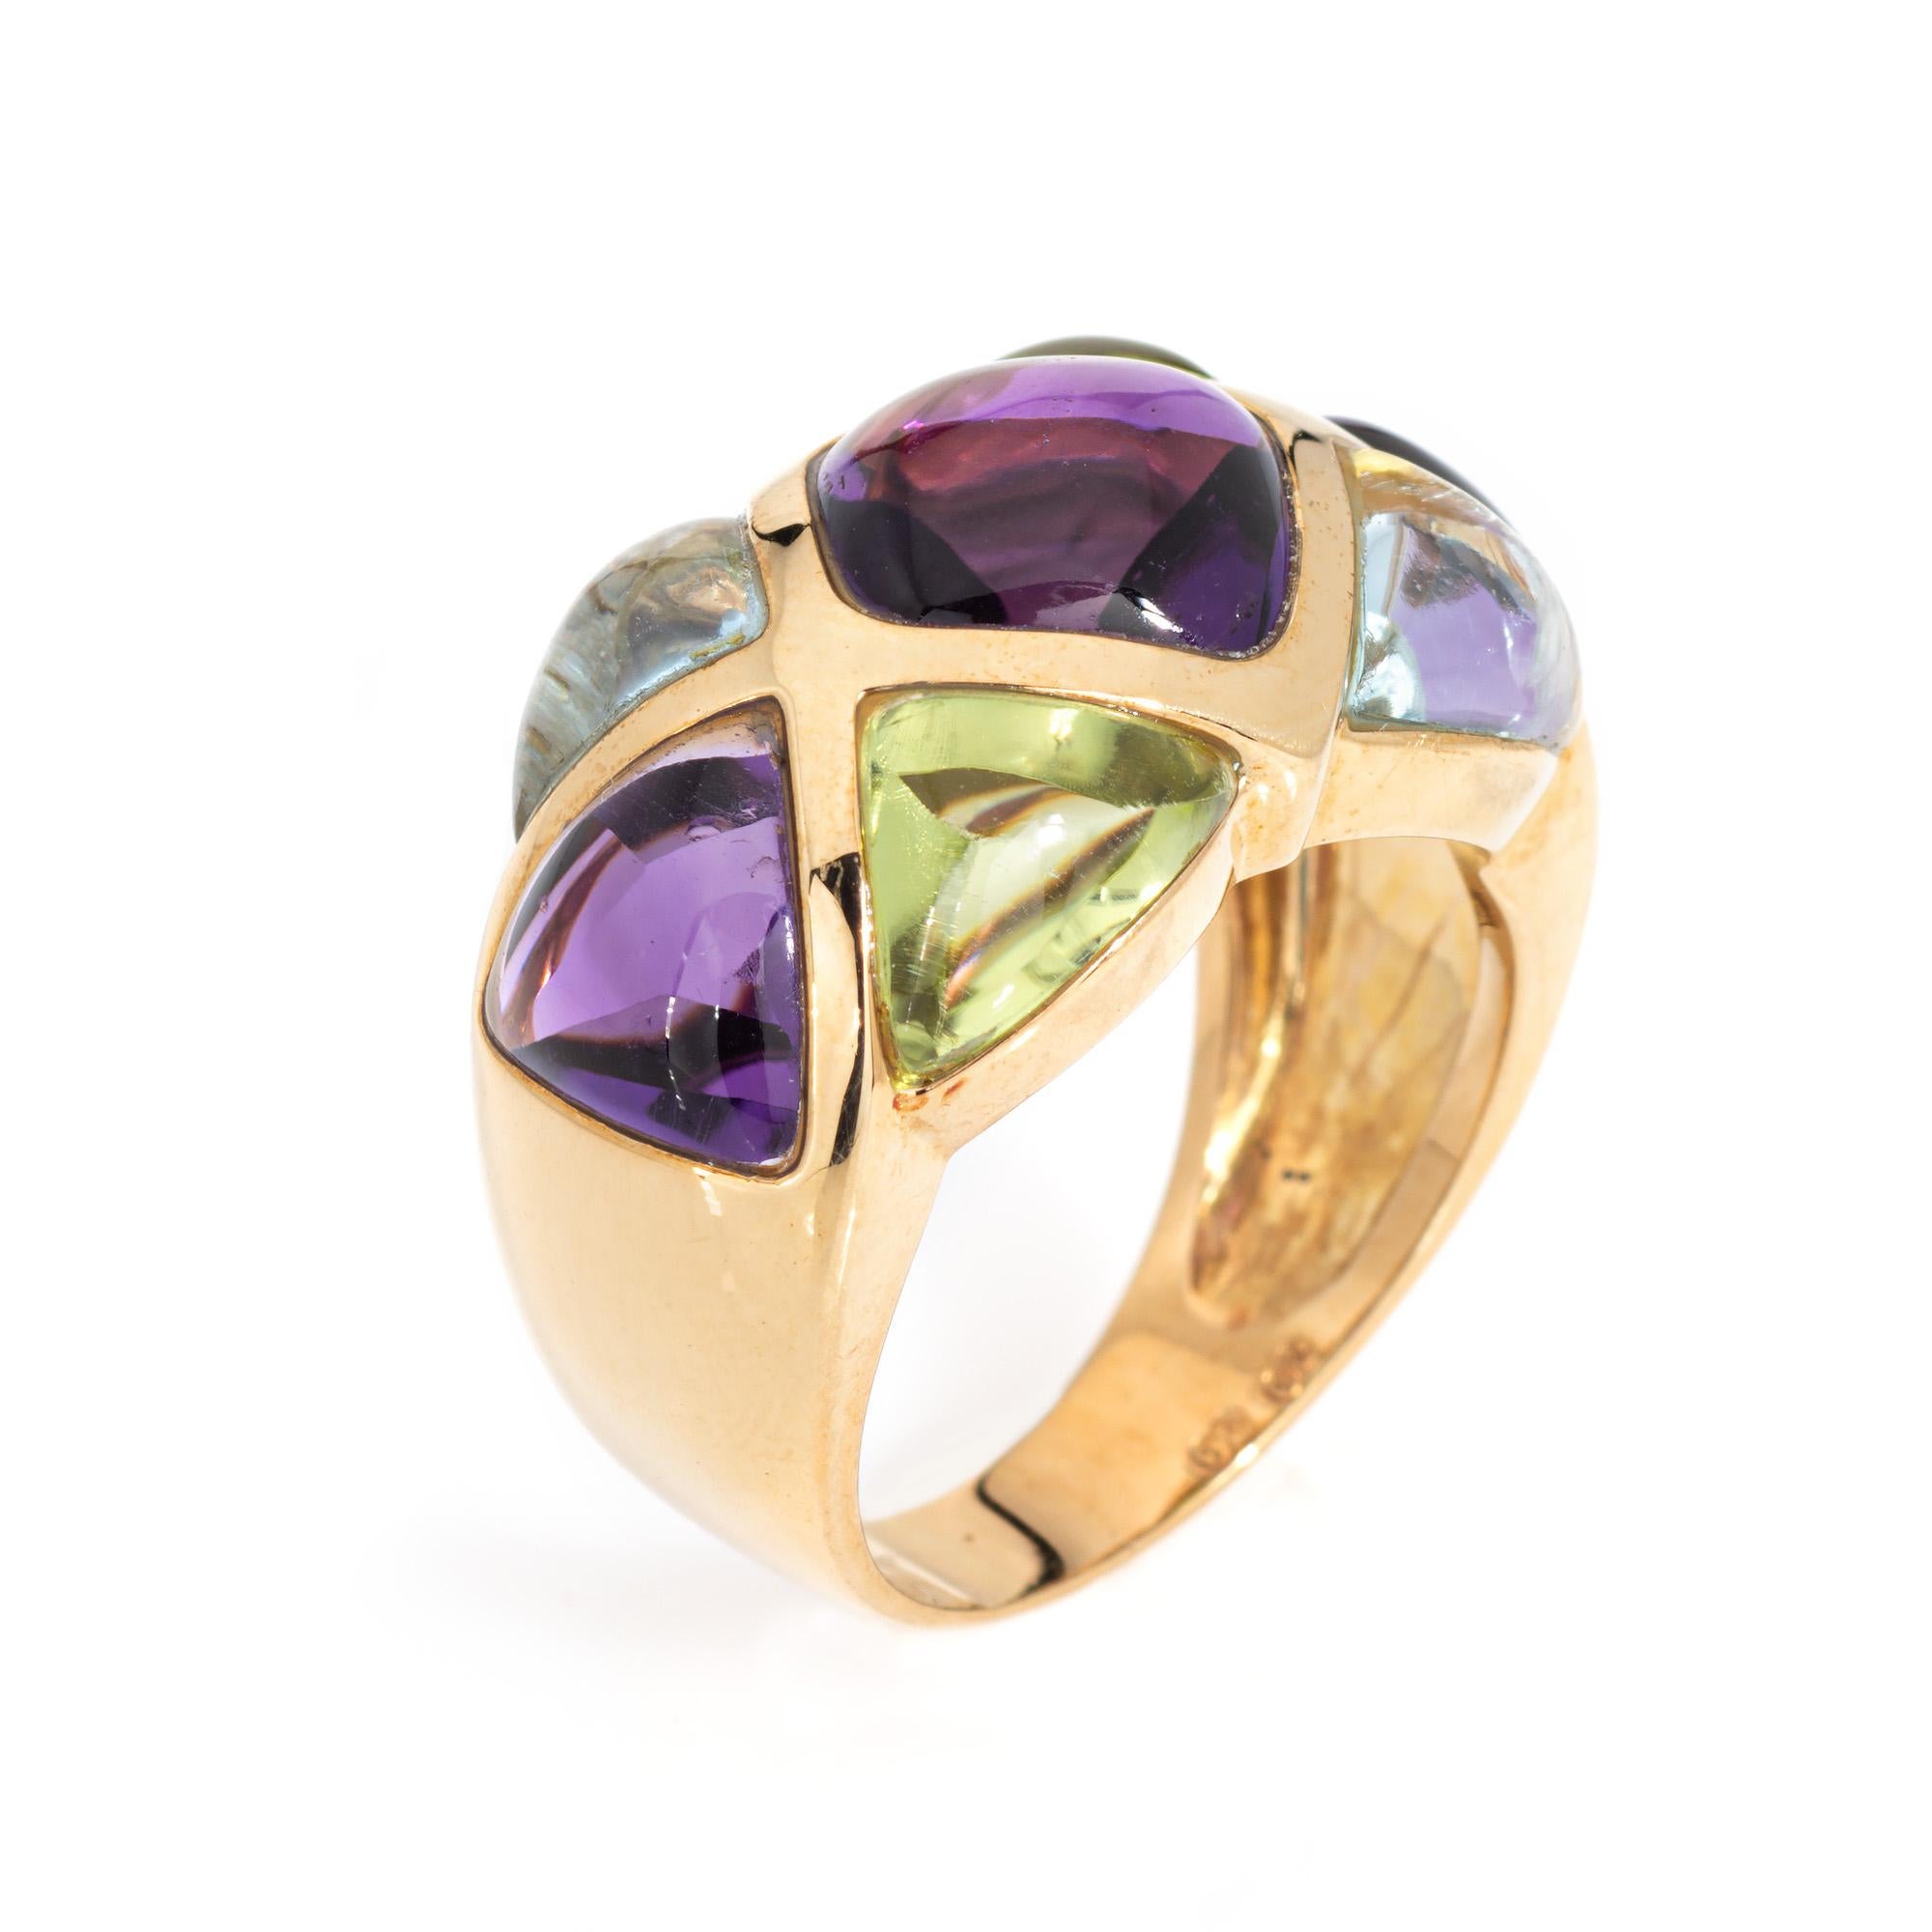 Stylish estate amethyst, peridot and blue topaz band crafted in 18 karat yellow gold. 

Cabochon cut amethyst measures 10mm x 9mm (center) and 7mm (sides). Peridot and blue topaz measures 7mm x 5mm. The semi precious gemstones are in good condition